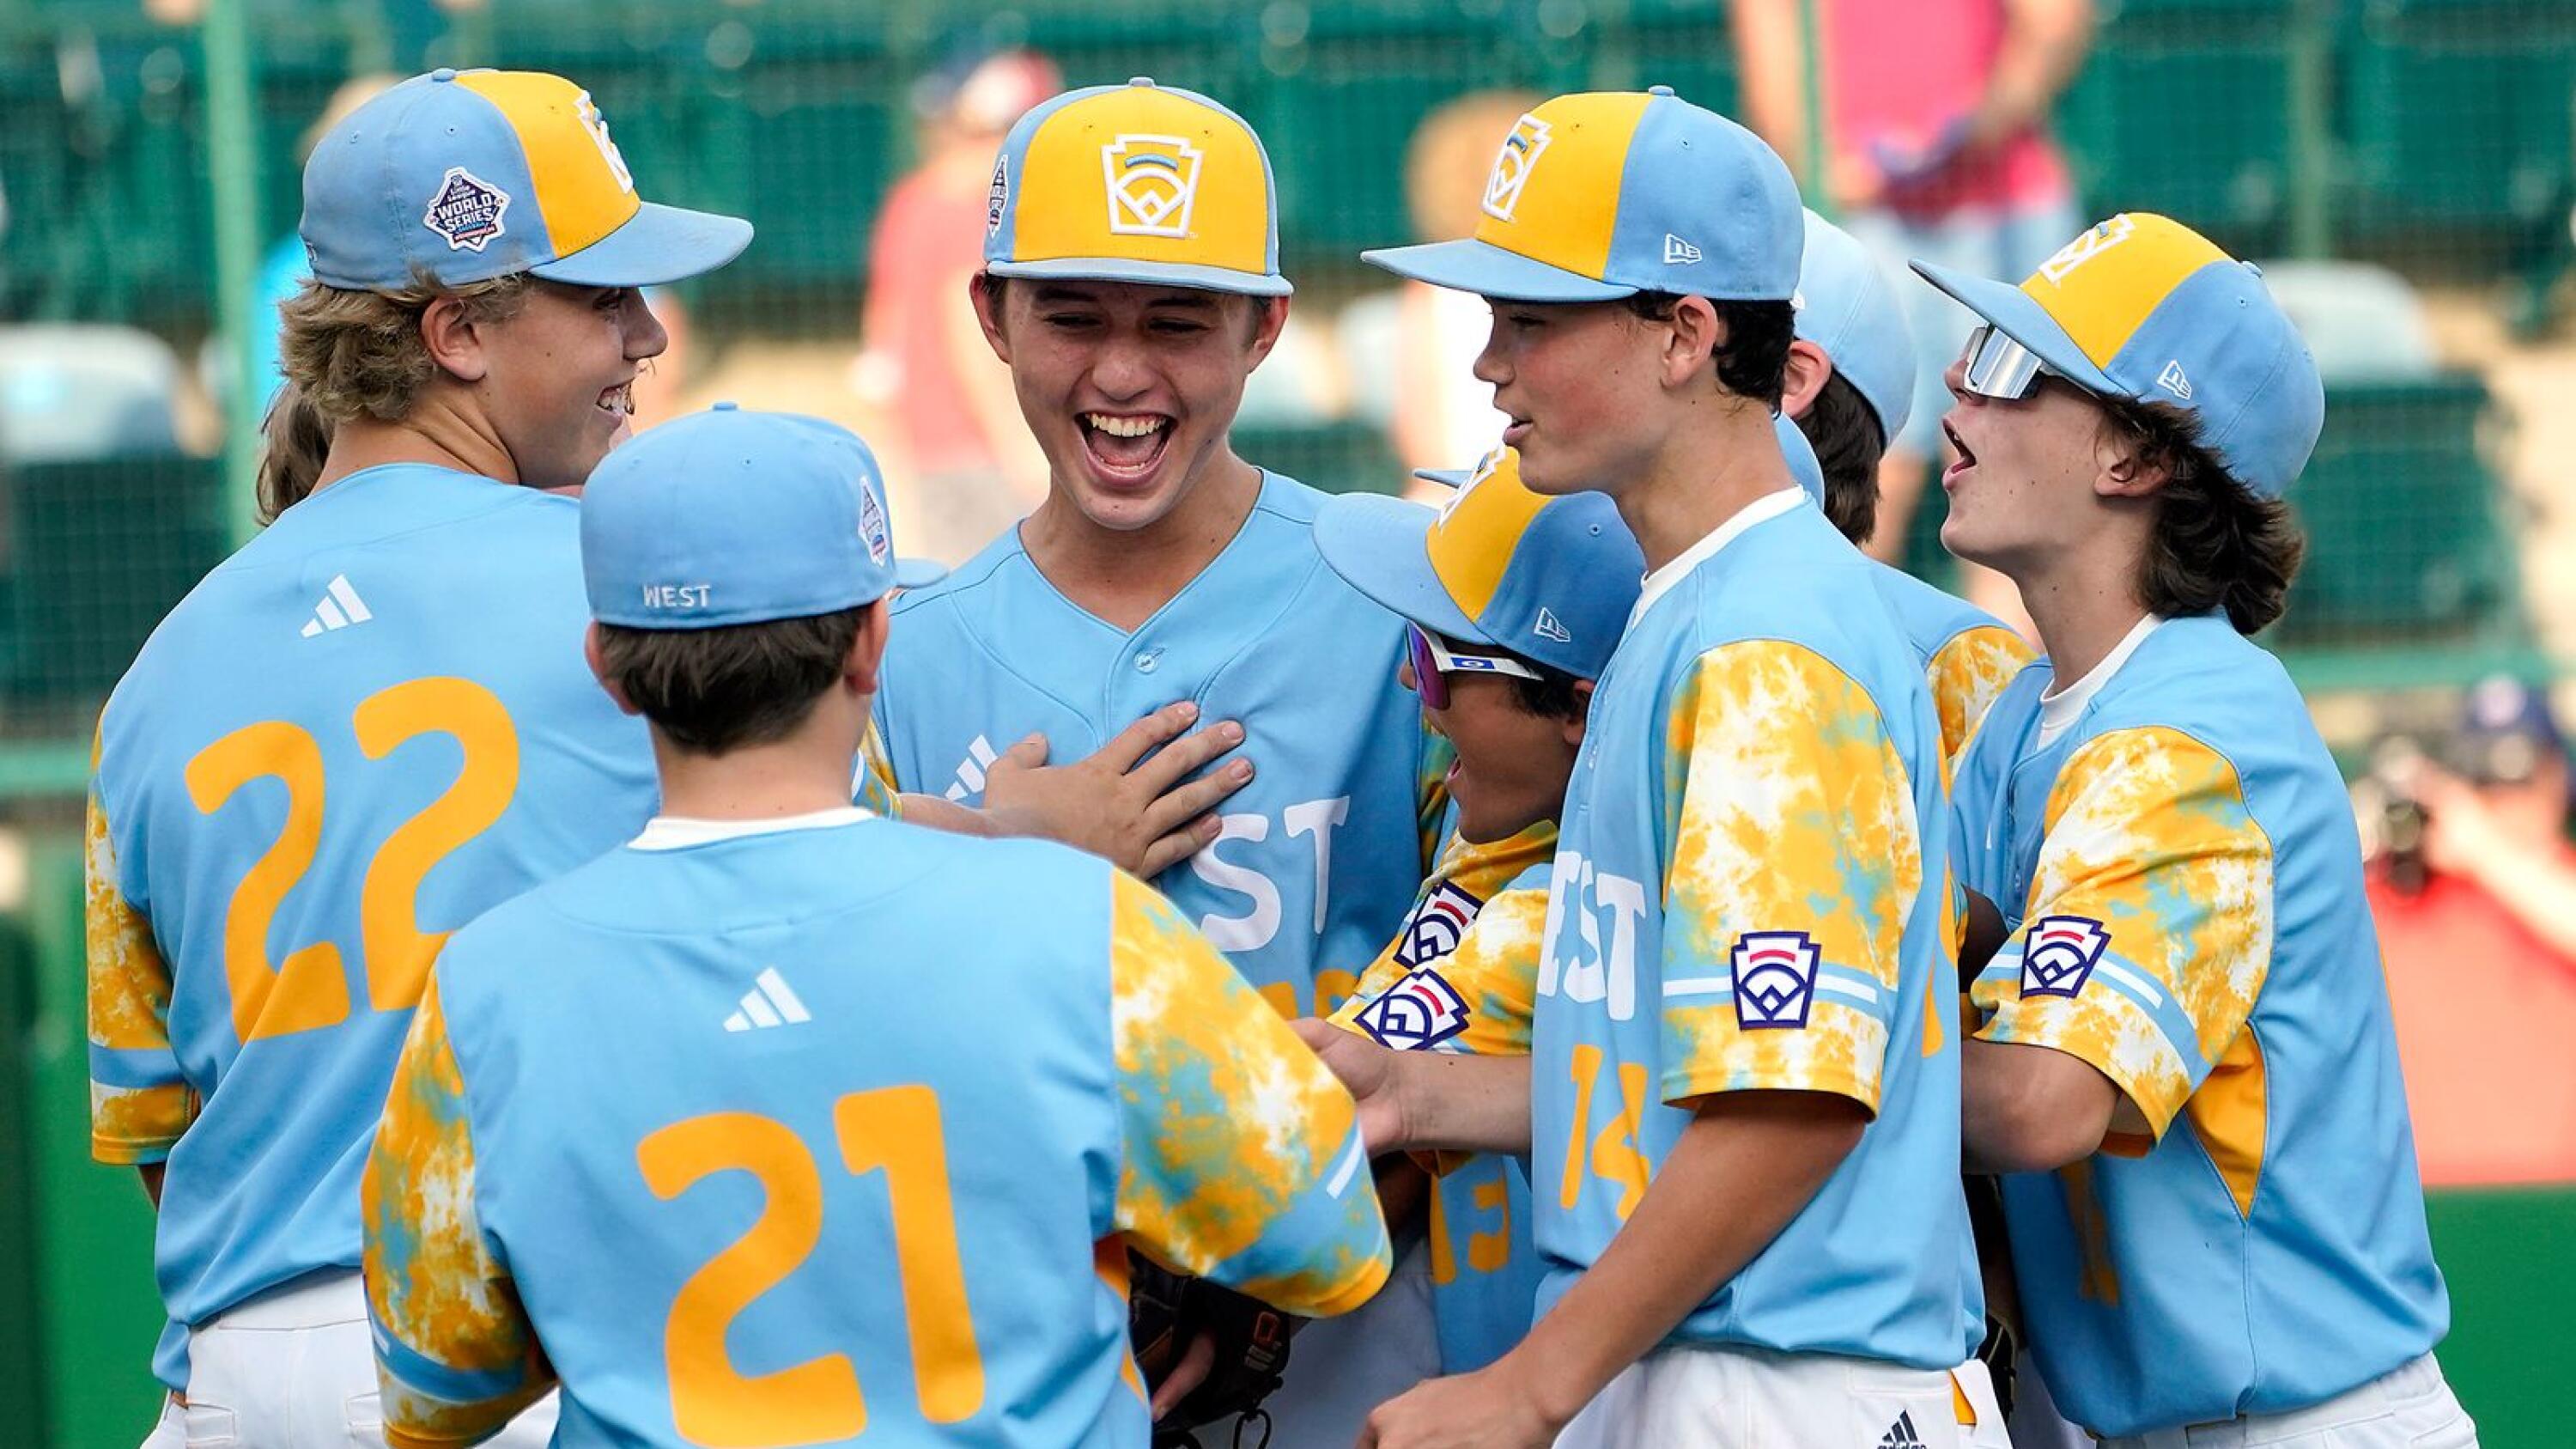 Opinion: Why El Segundo, home of the 2023 Little League World